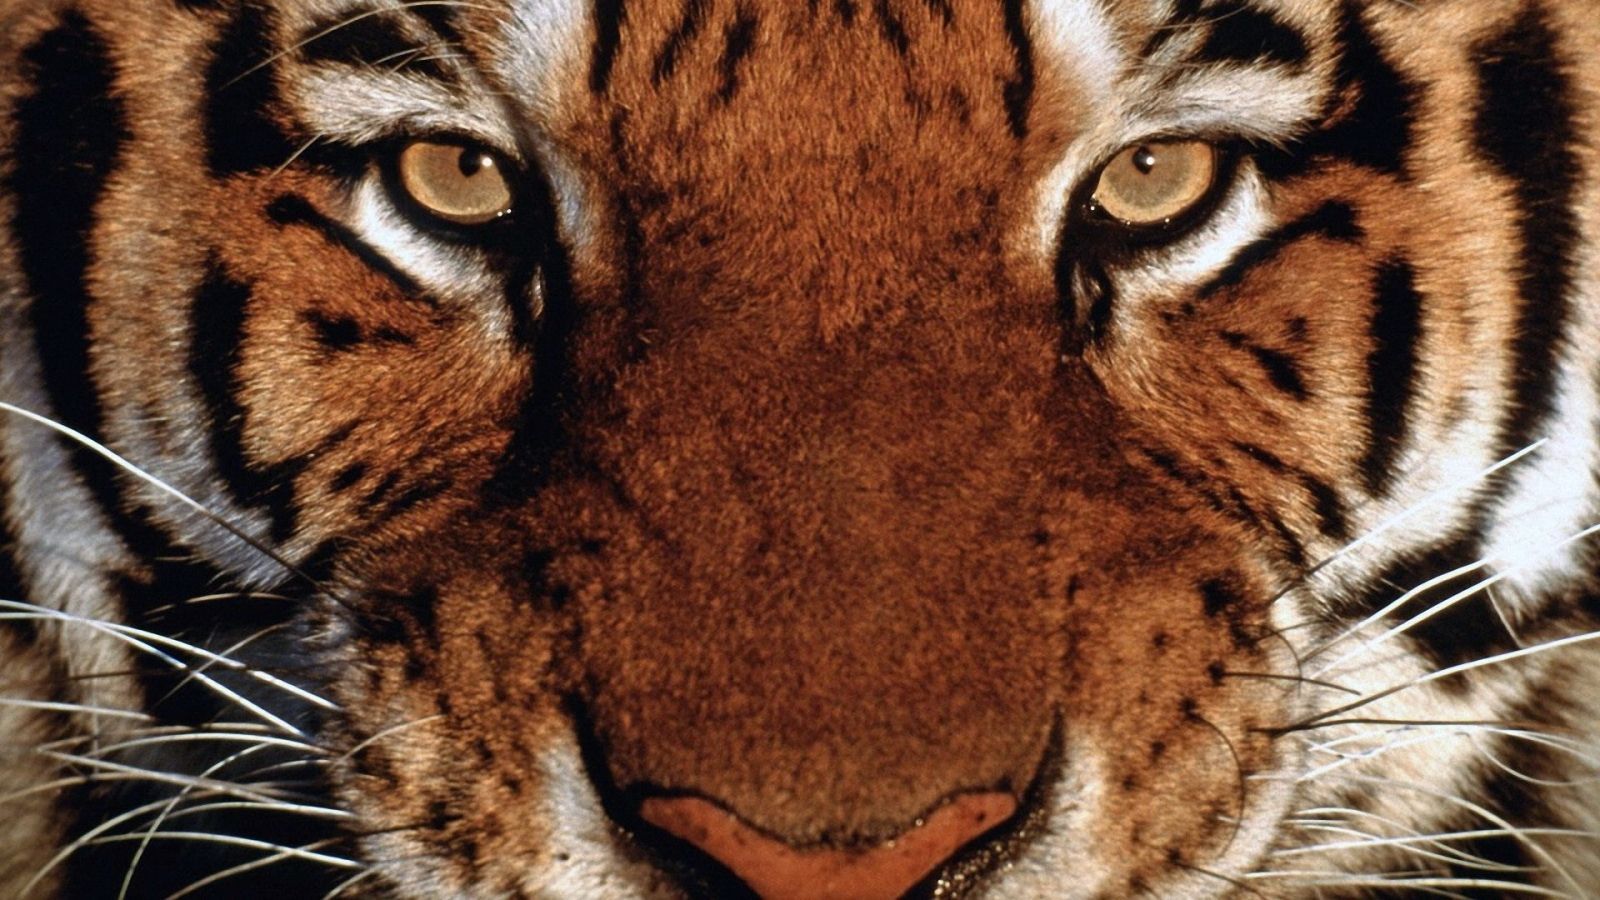 The Face of the Bengal Tiger 1600x900 Wallpapers,Tiger 1600x900